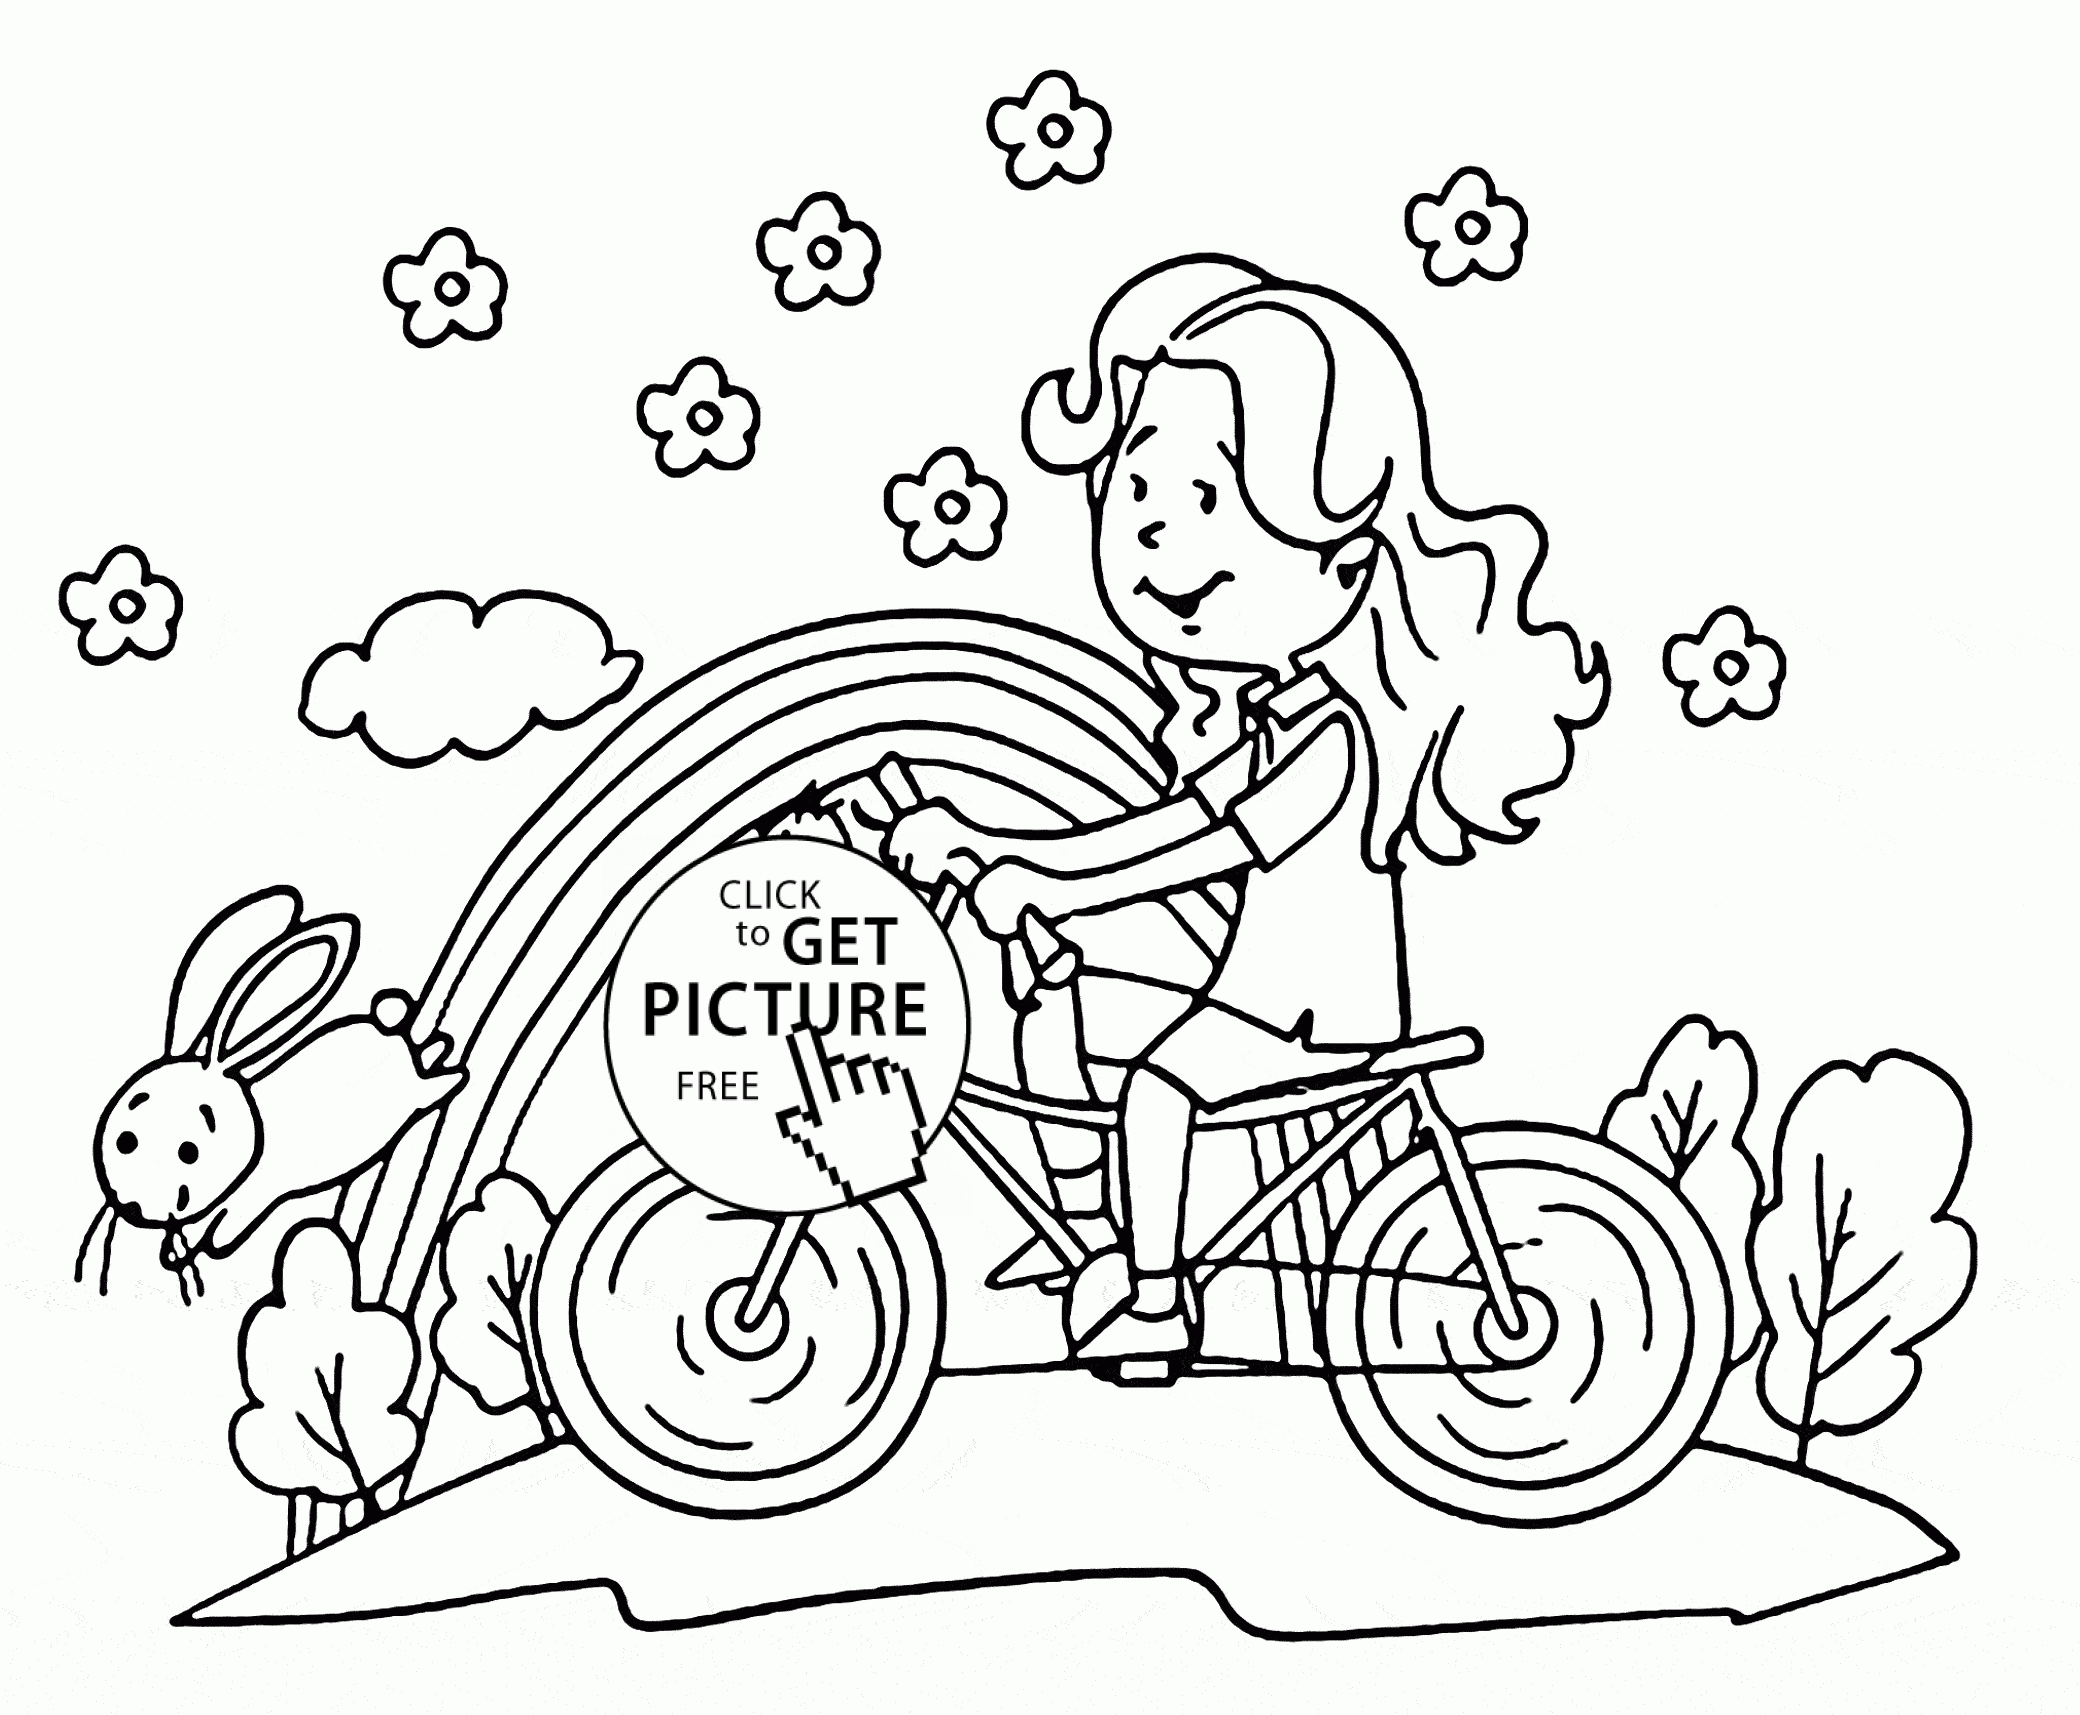 Spring Coloring Pages Riding Bike In Spring Coloring Page For Kids Seasons Coloring Pages